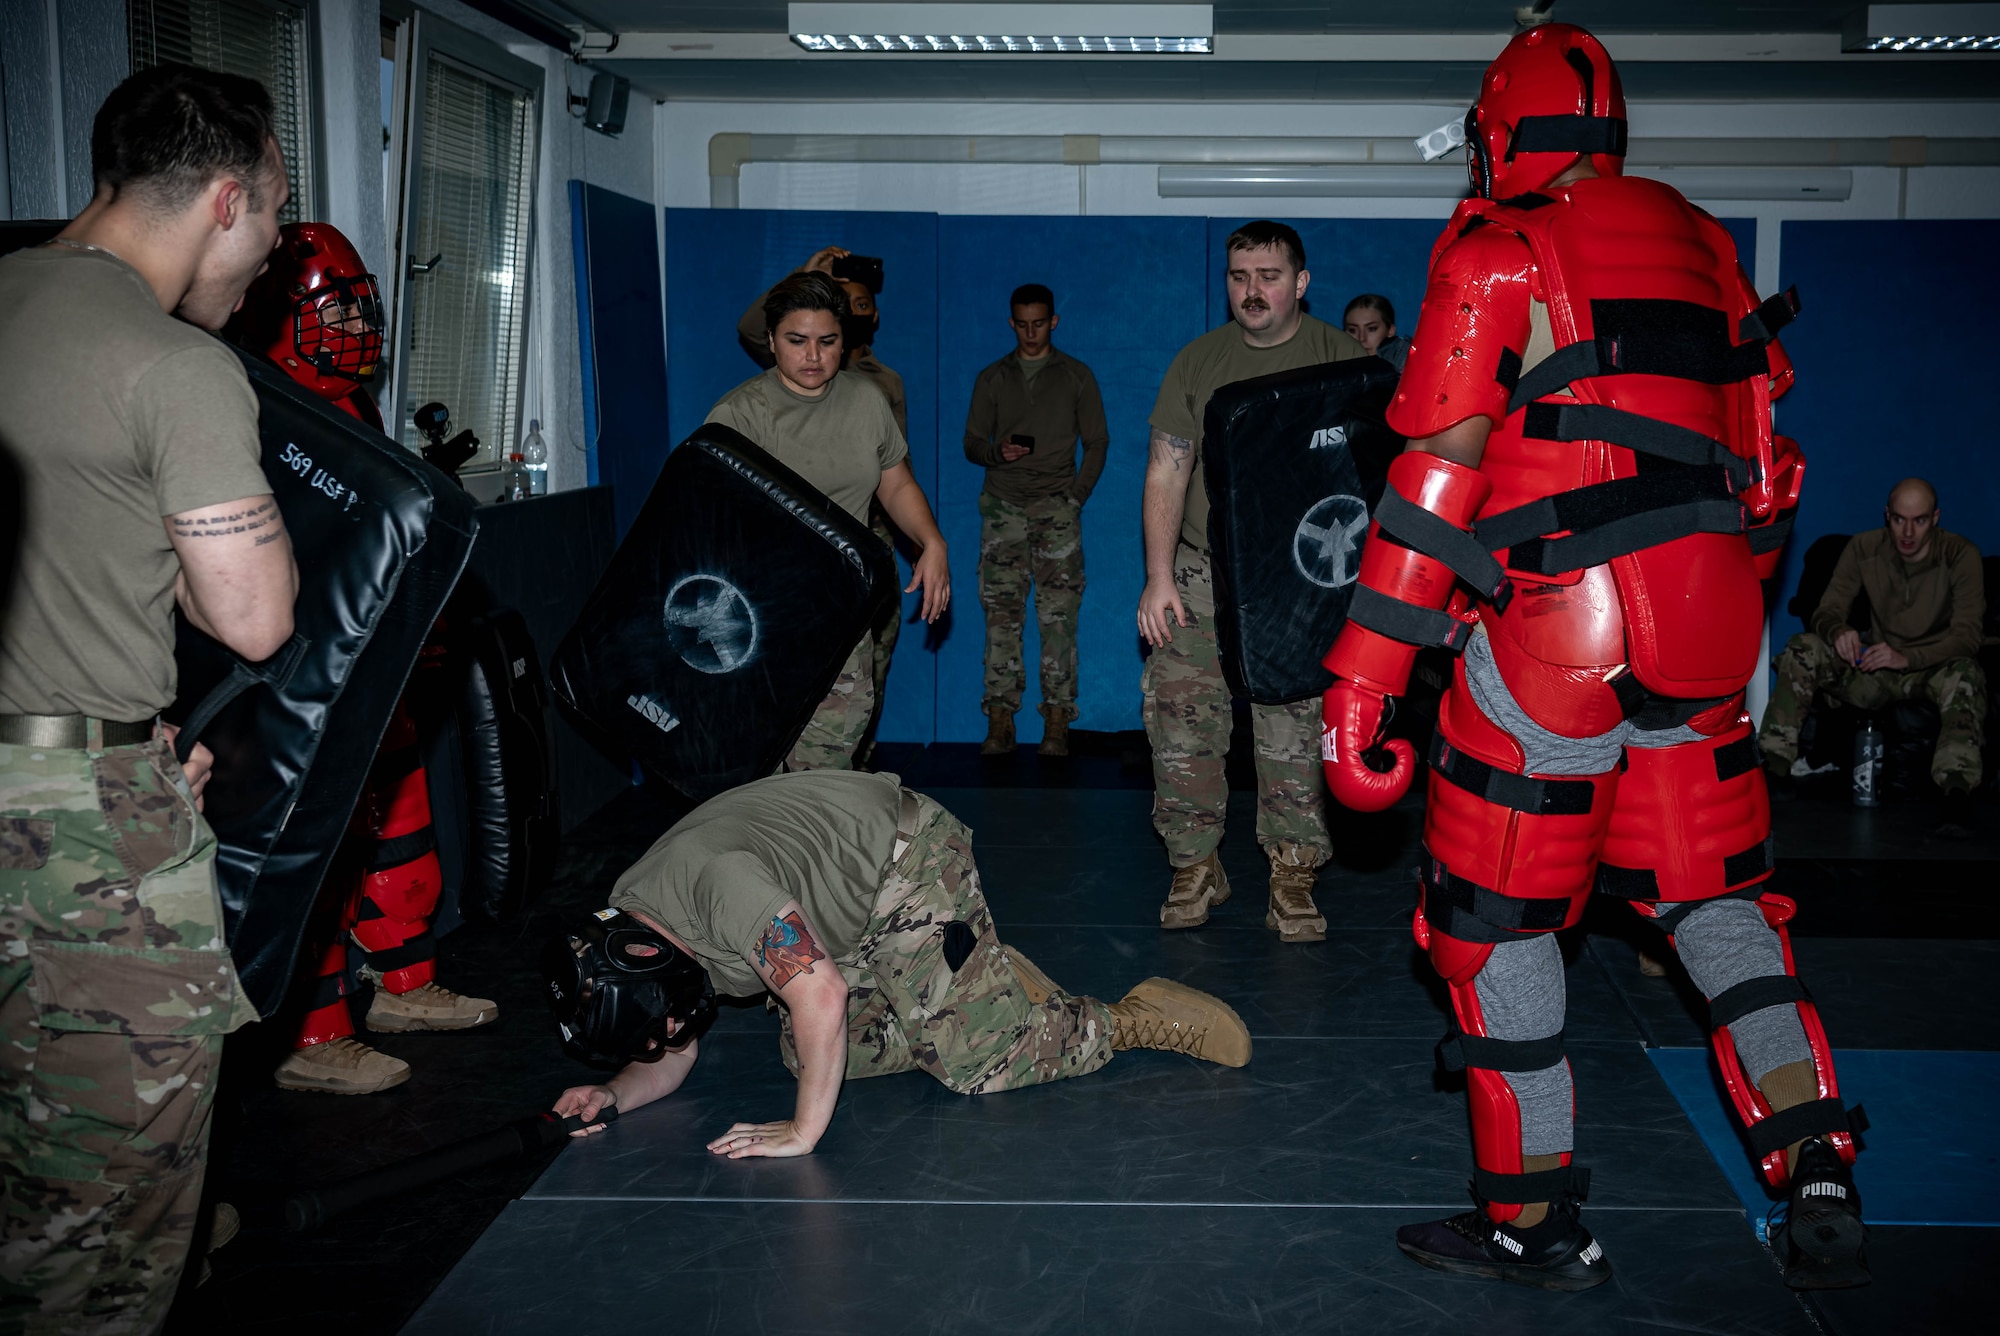 Airmen assigned to the 569th United States Forces Police Squadron, undergo Red Man training at Vogelweh Air Station, Germany, Dec. 6, 2021. Red Man training serves to prepare Airmen for a real-life physical altercation with a violent individual and build their confidence so that they respond to such a situation appropriately. Red Man training provides 569th USFPS Airmen with a controlled environment to train on how to react to a physical altercation with a violent individual. (U.S. Air Force photo by Airman Jared Lovett)